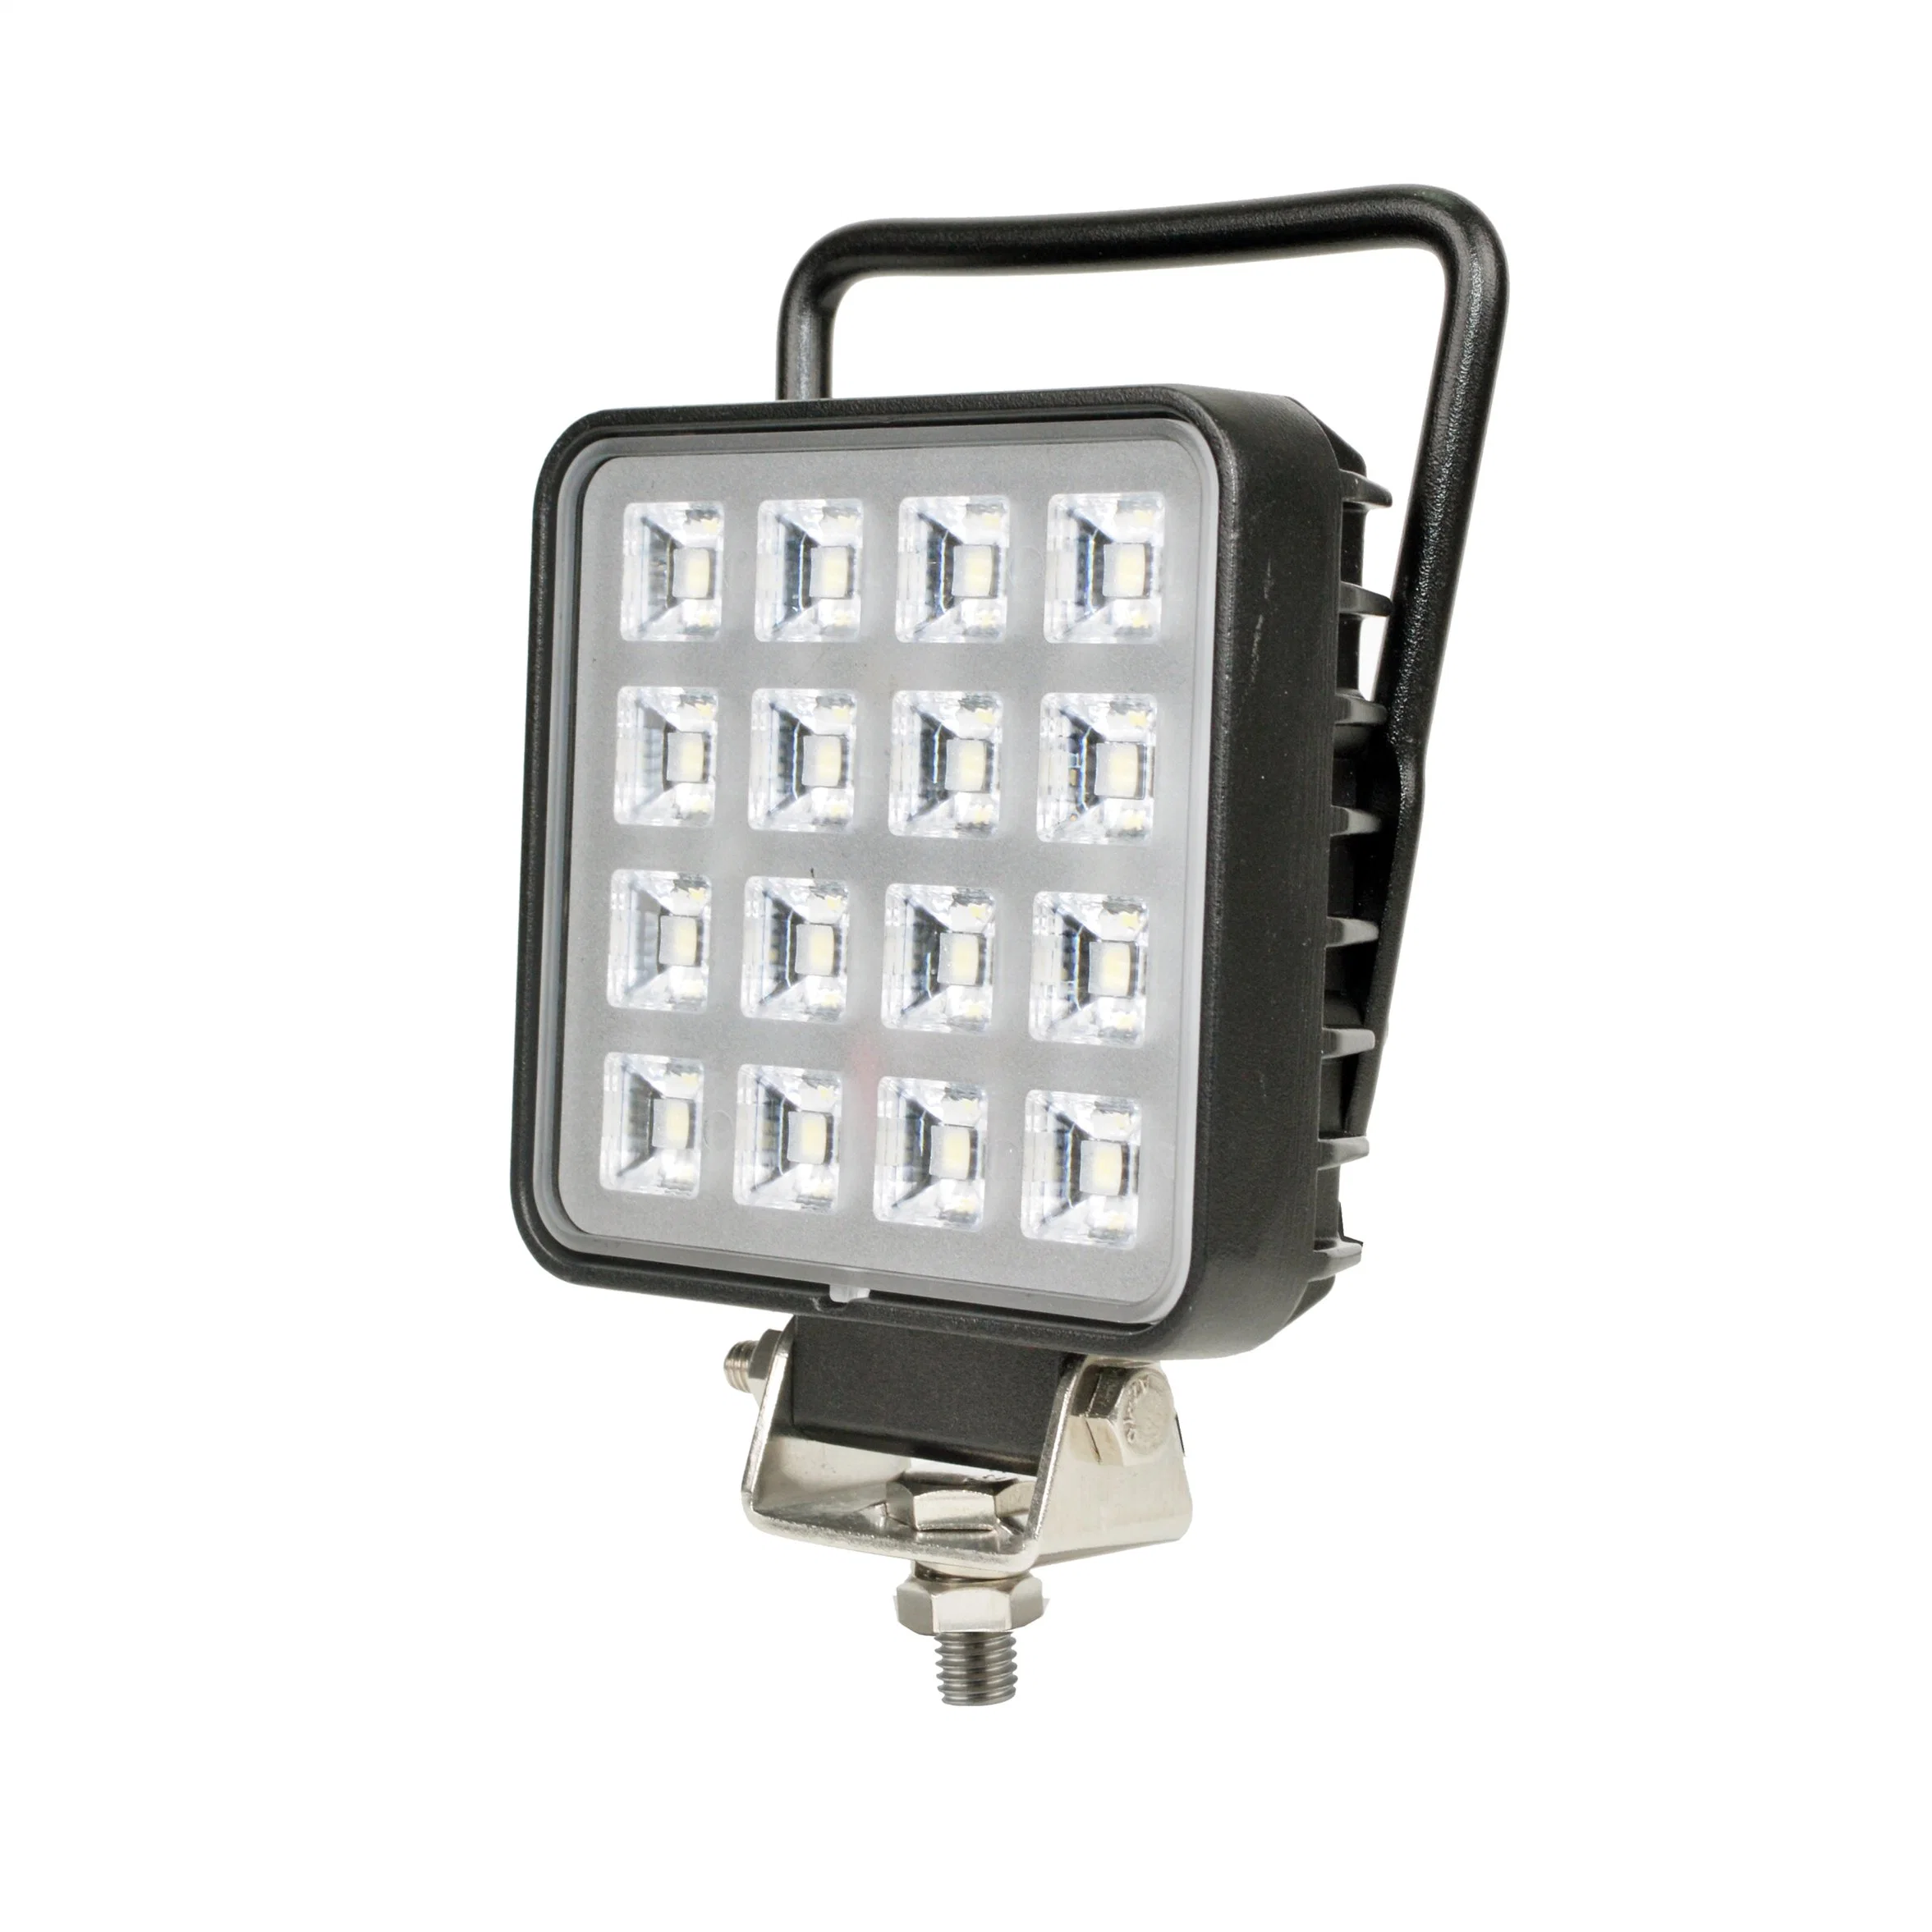 LED Auto Lamp 3.5inch 16W Work Handy Lamp for Construction Vehicles